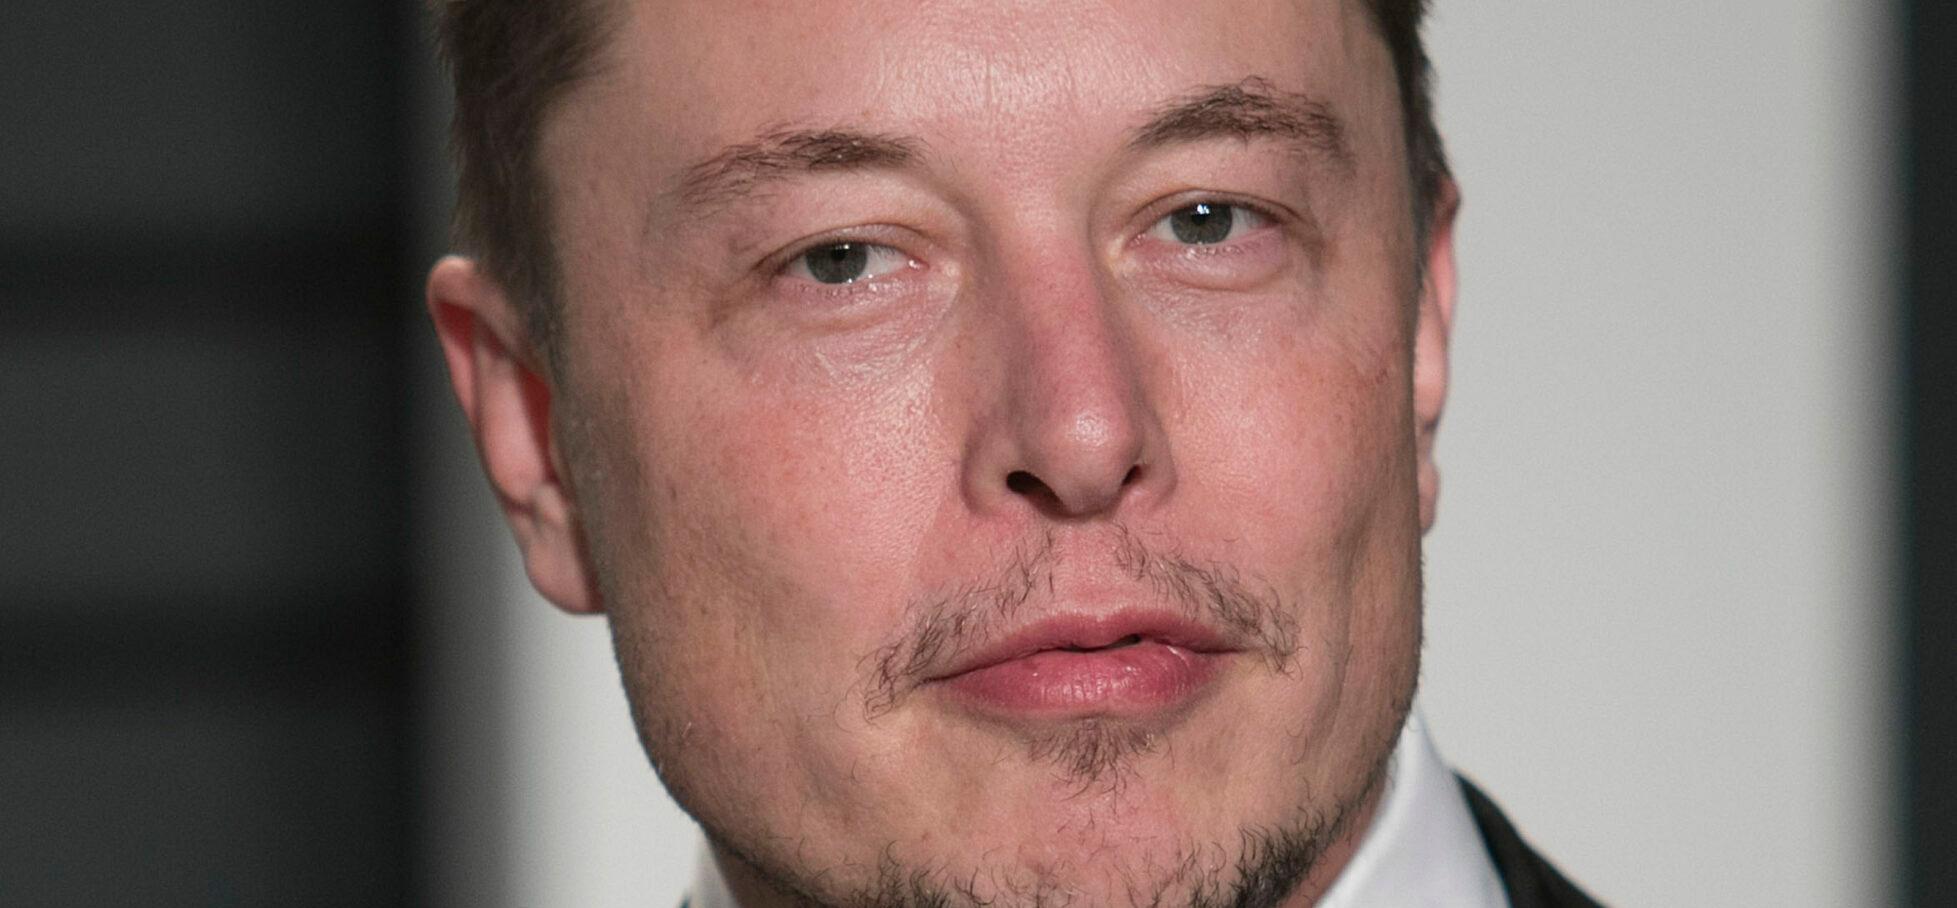 Elon Musk Breaks Silence On Cheating Allegations: ‘Total BS’